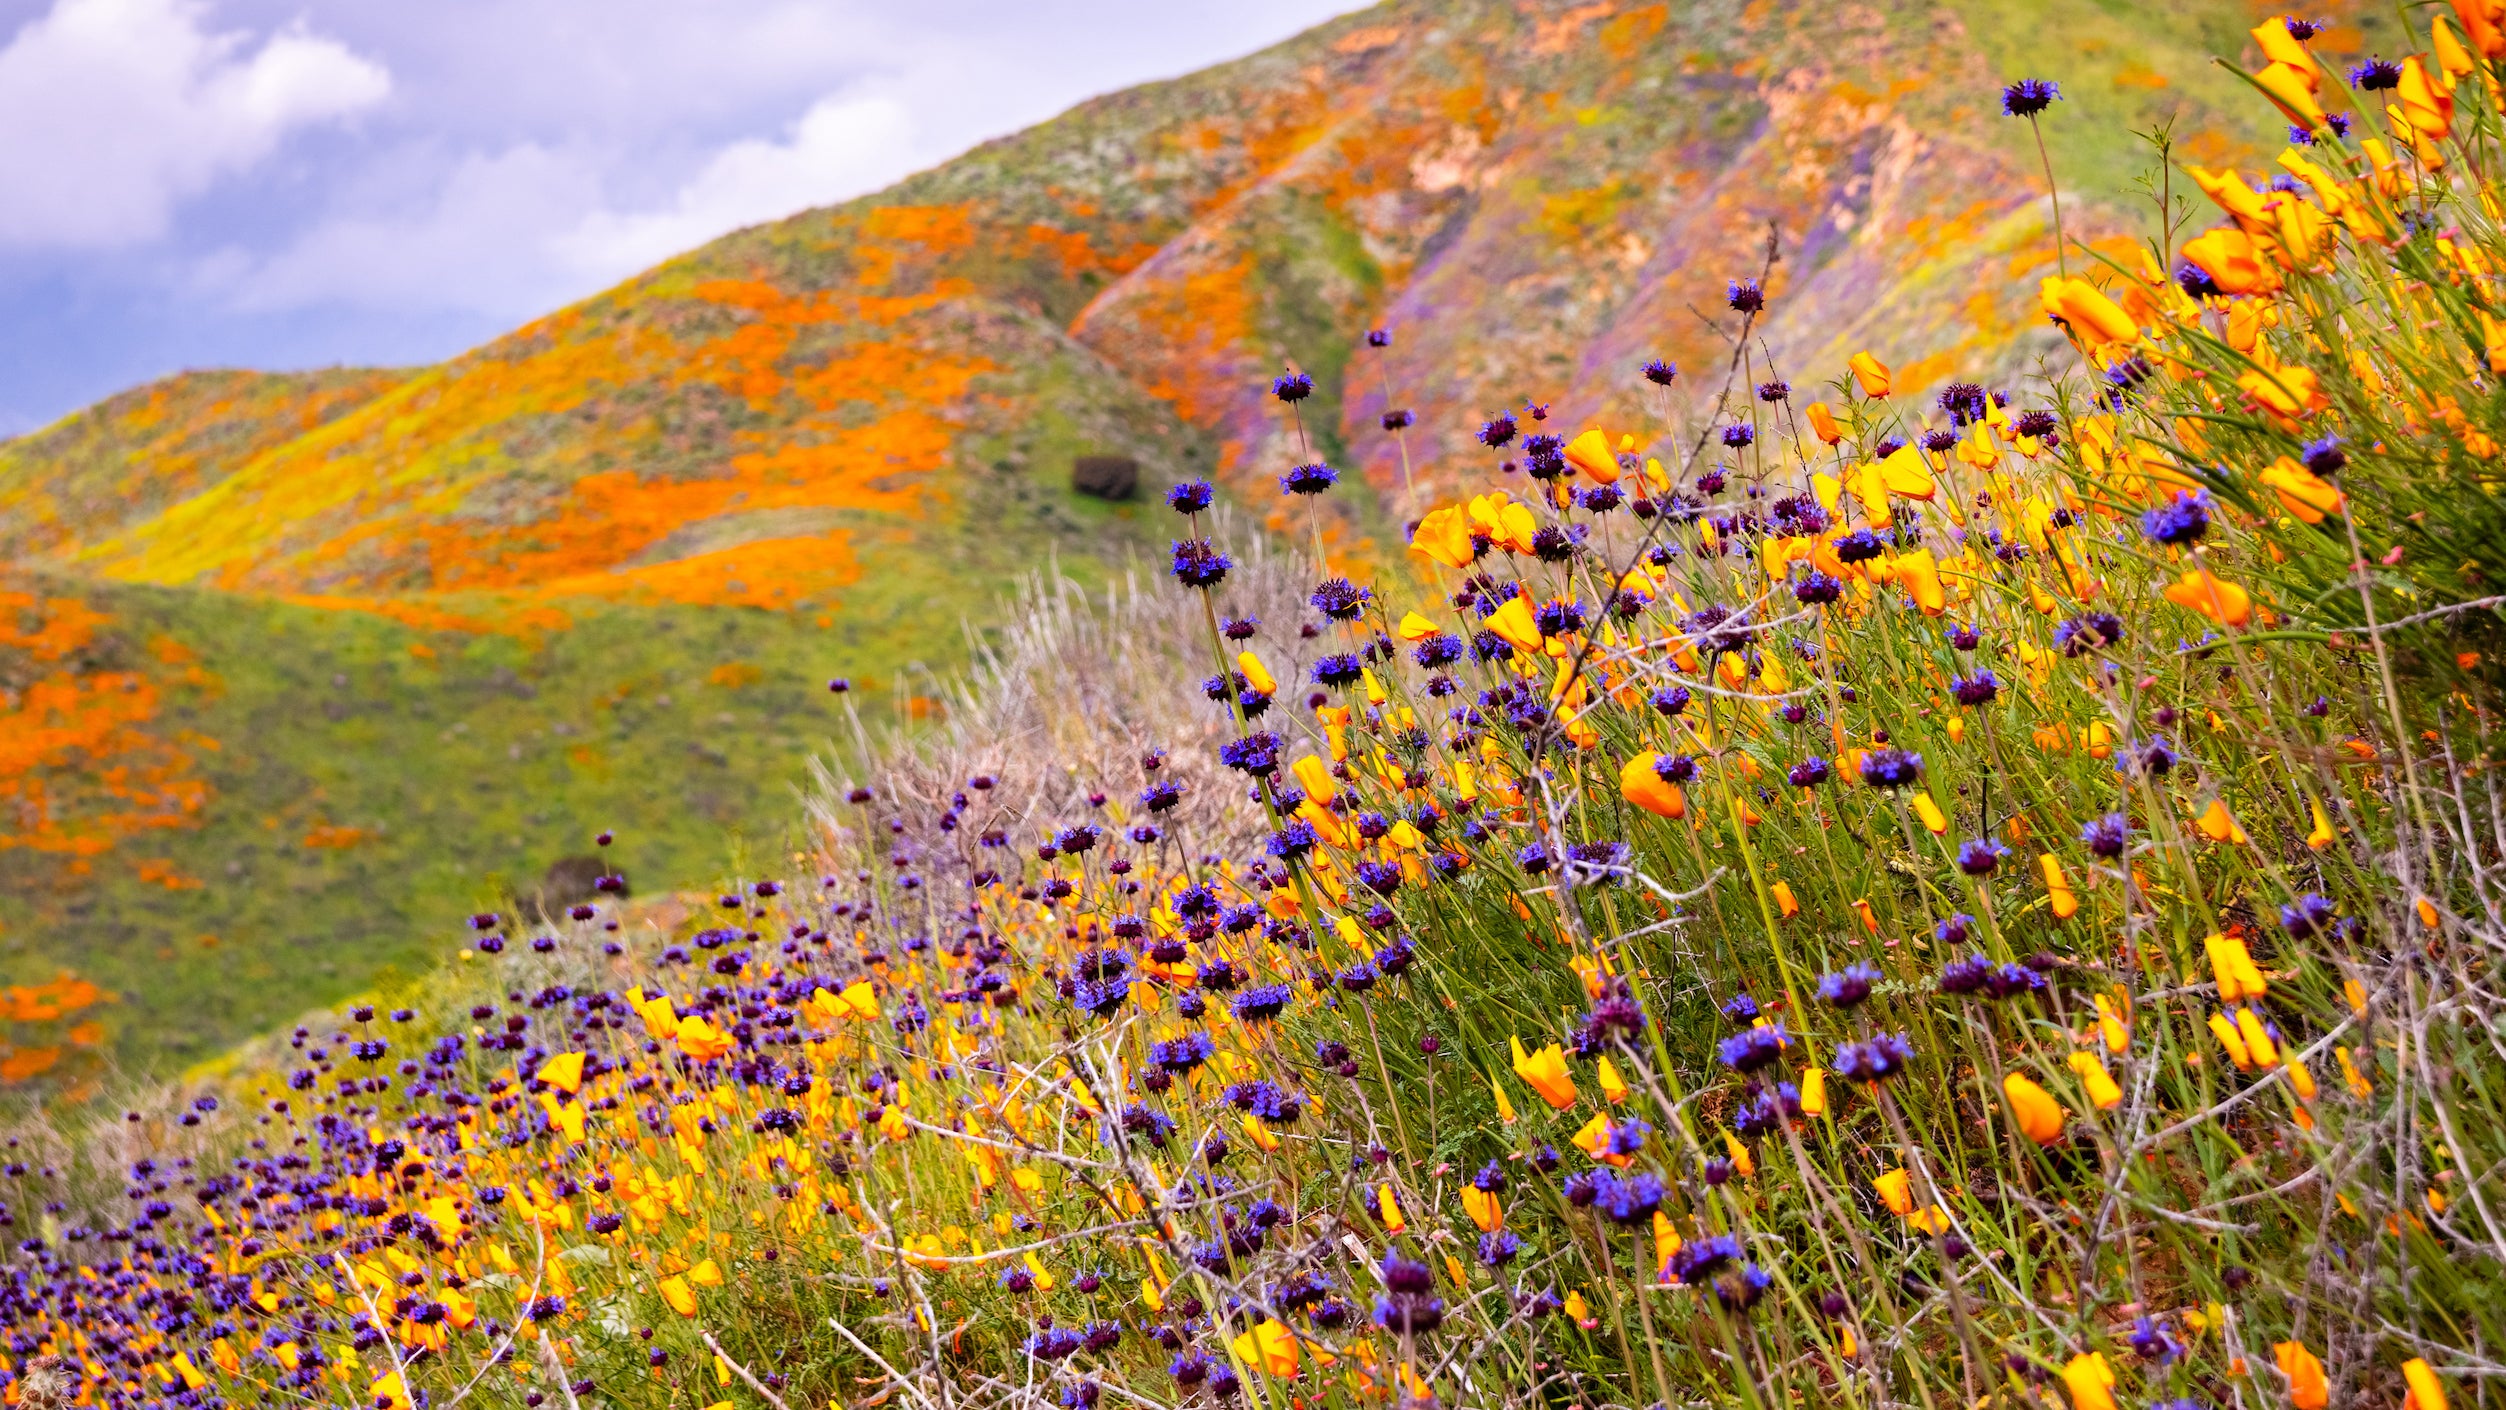 Wildflowers of all colors in bloom along the hillside in Walker Canyon